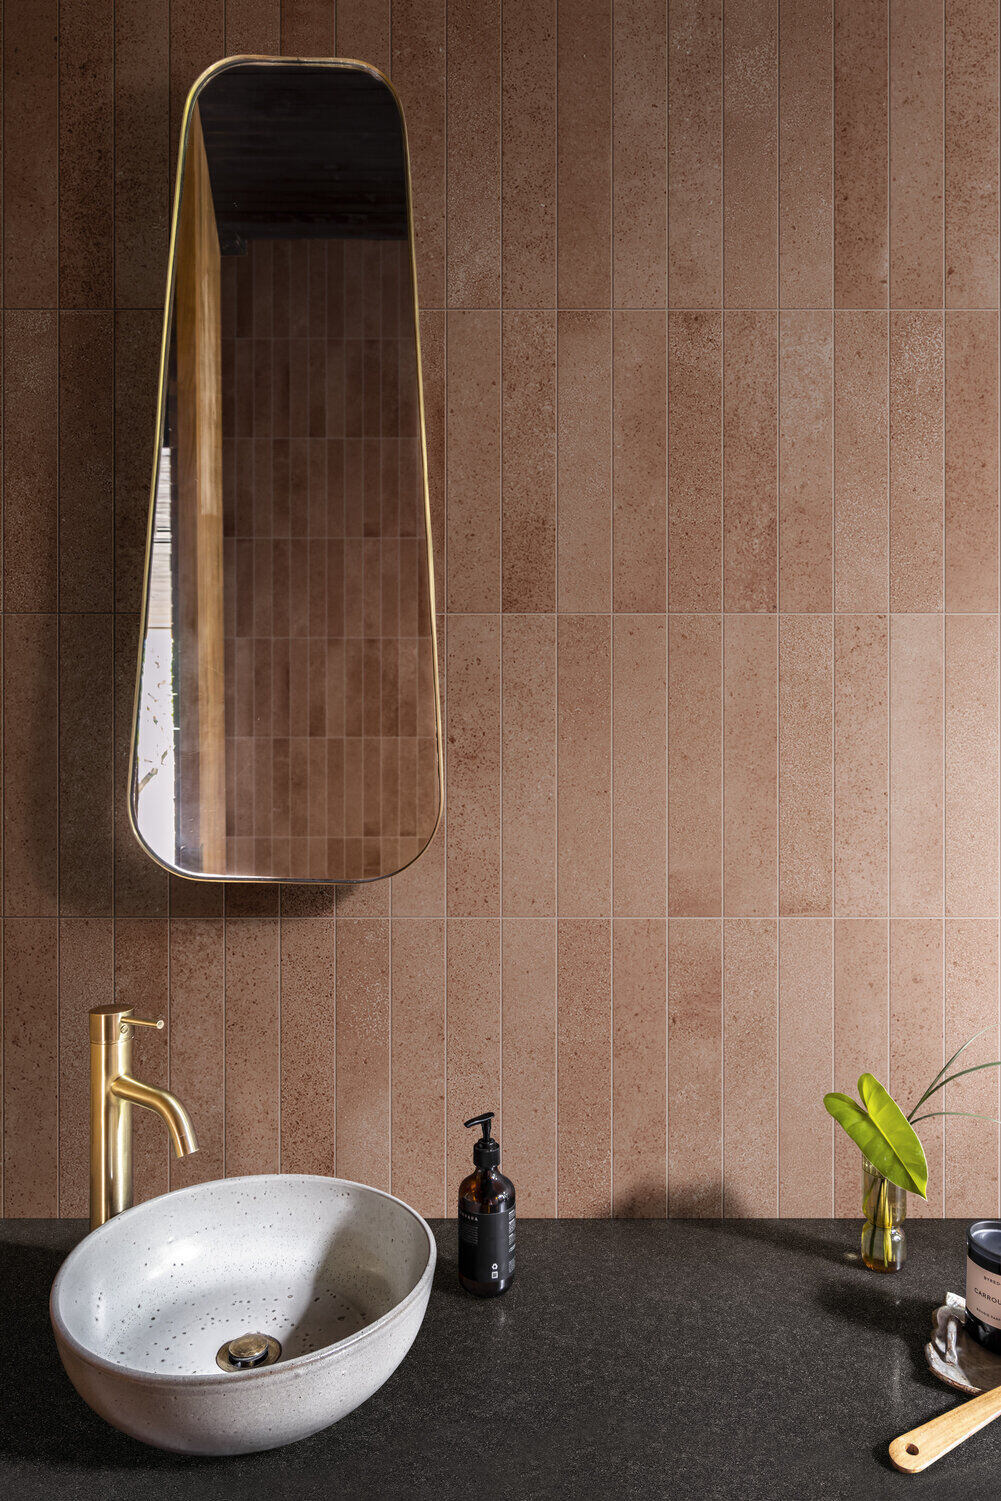 ArtCraft _ Marazzi _ Slow and Artcraft ceramic collections _ handcrafted artistry